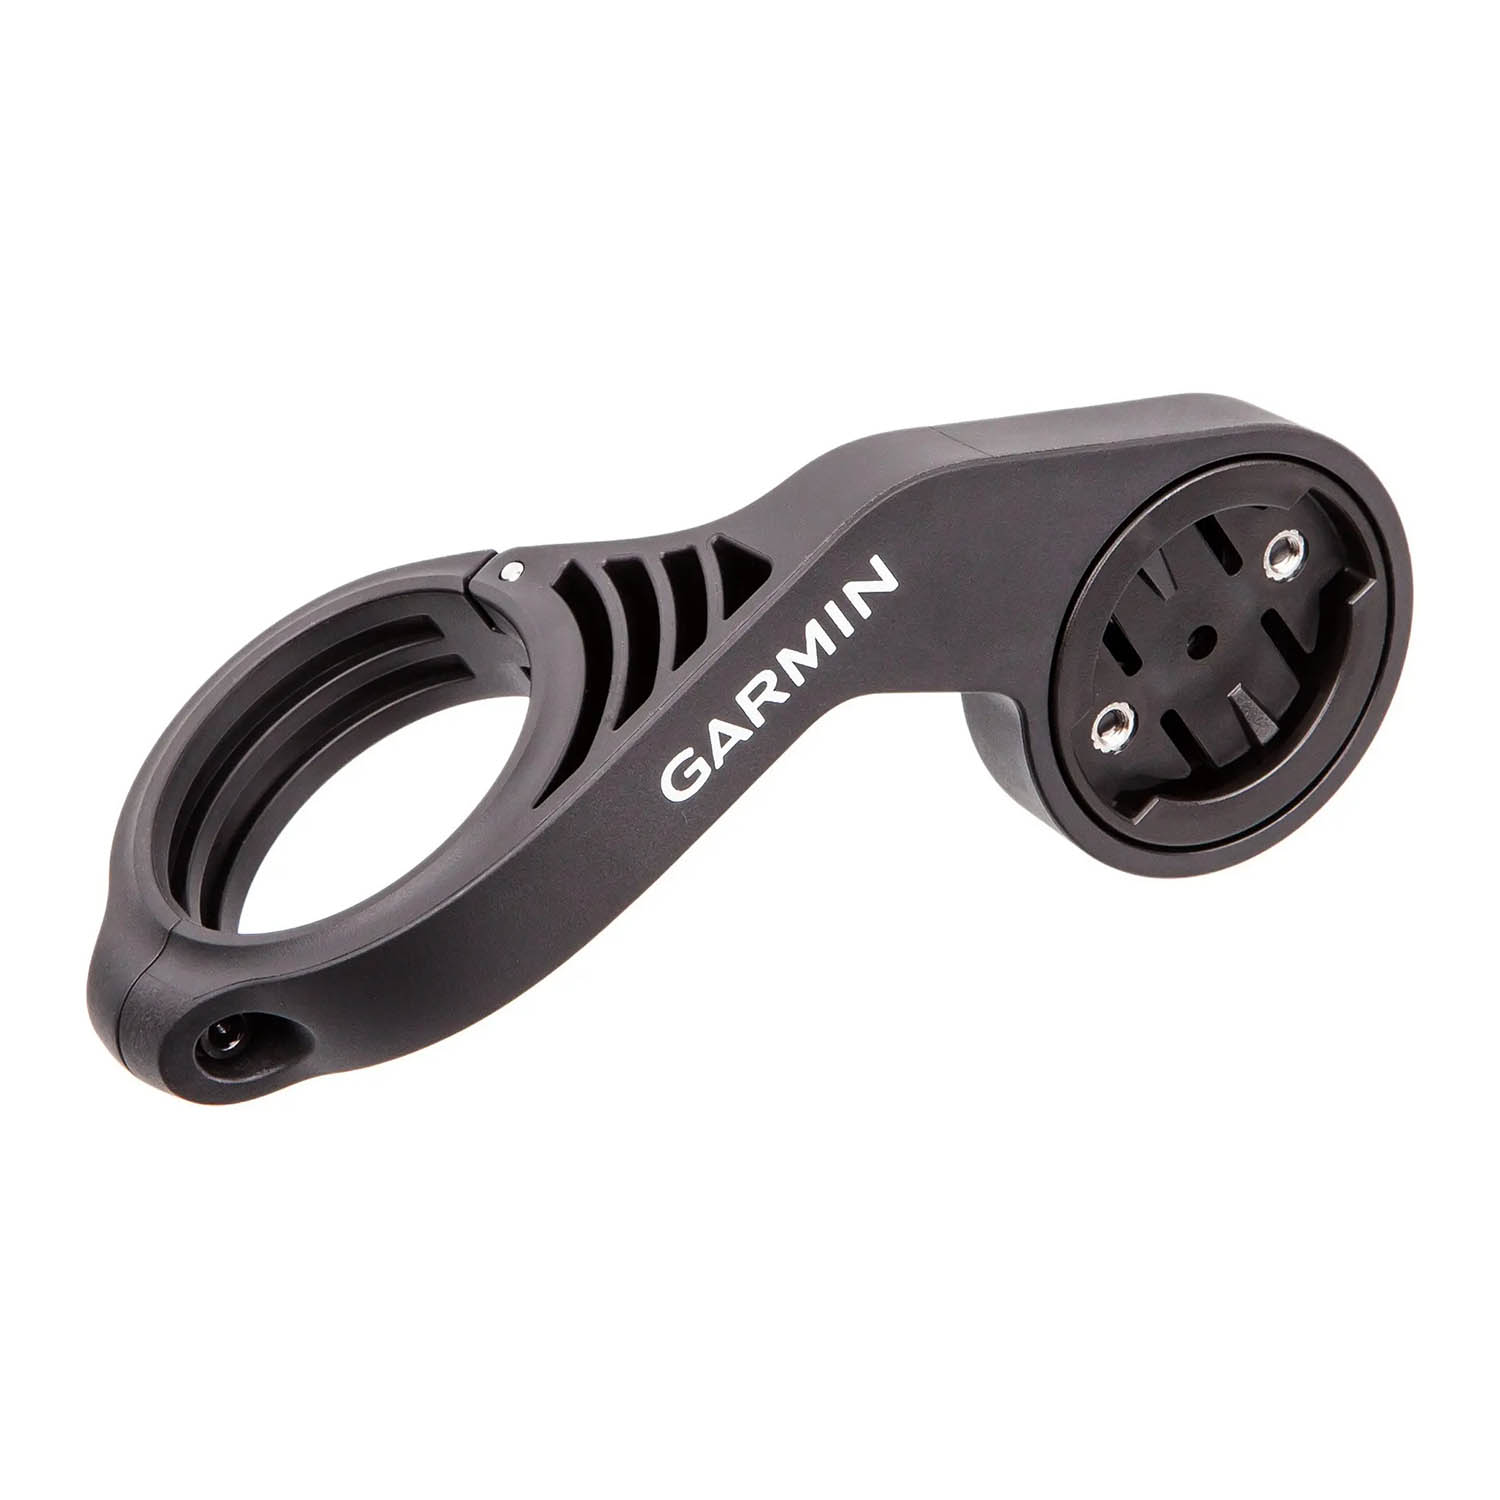 Garmin Out front mount Edge extended